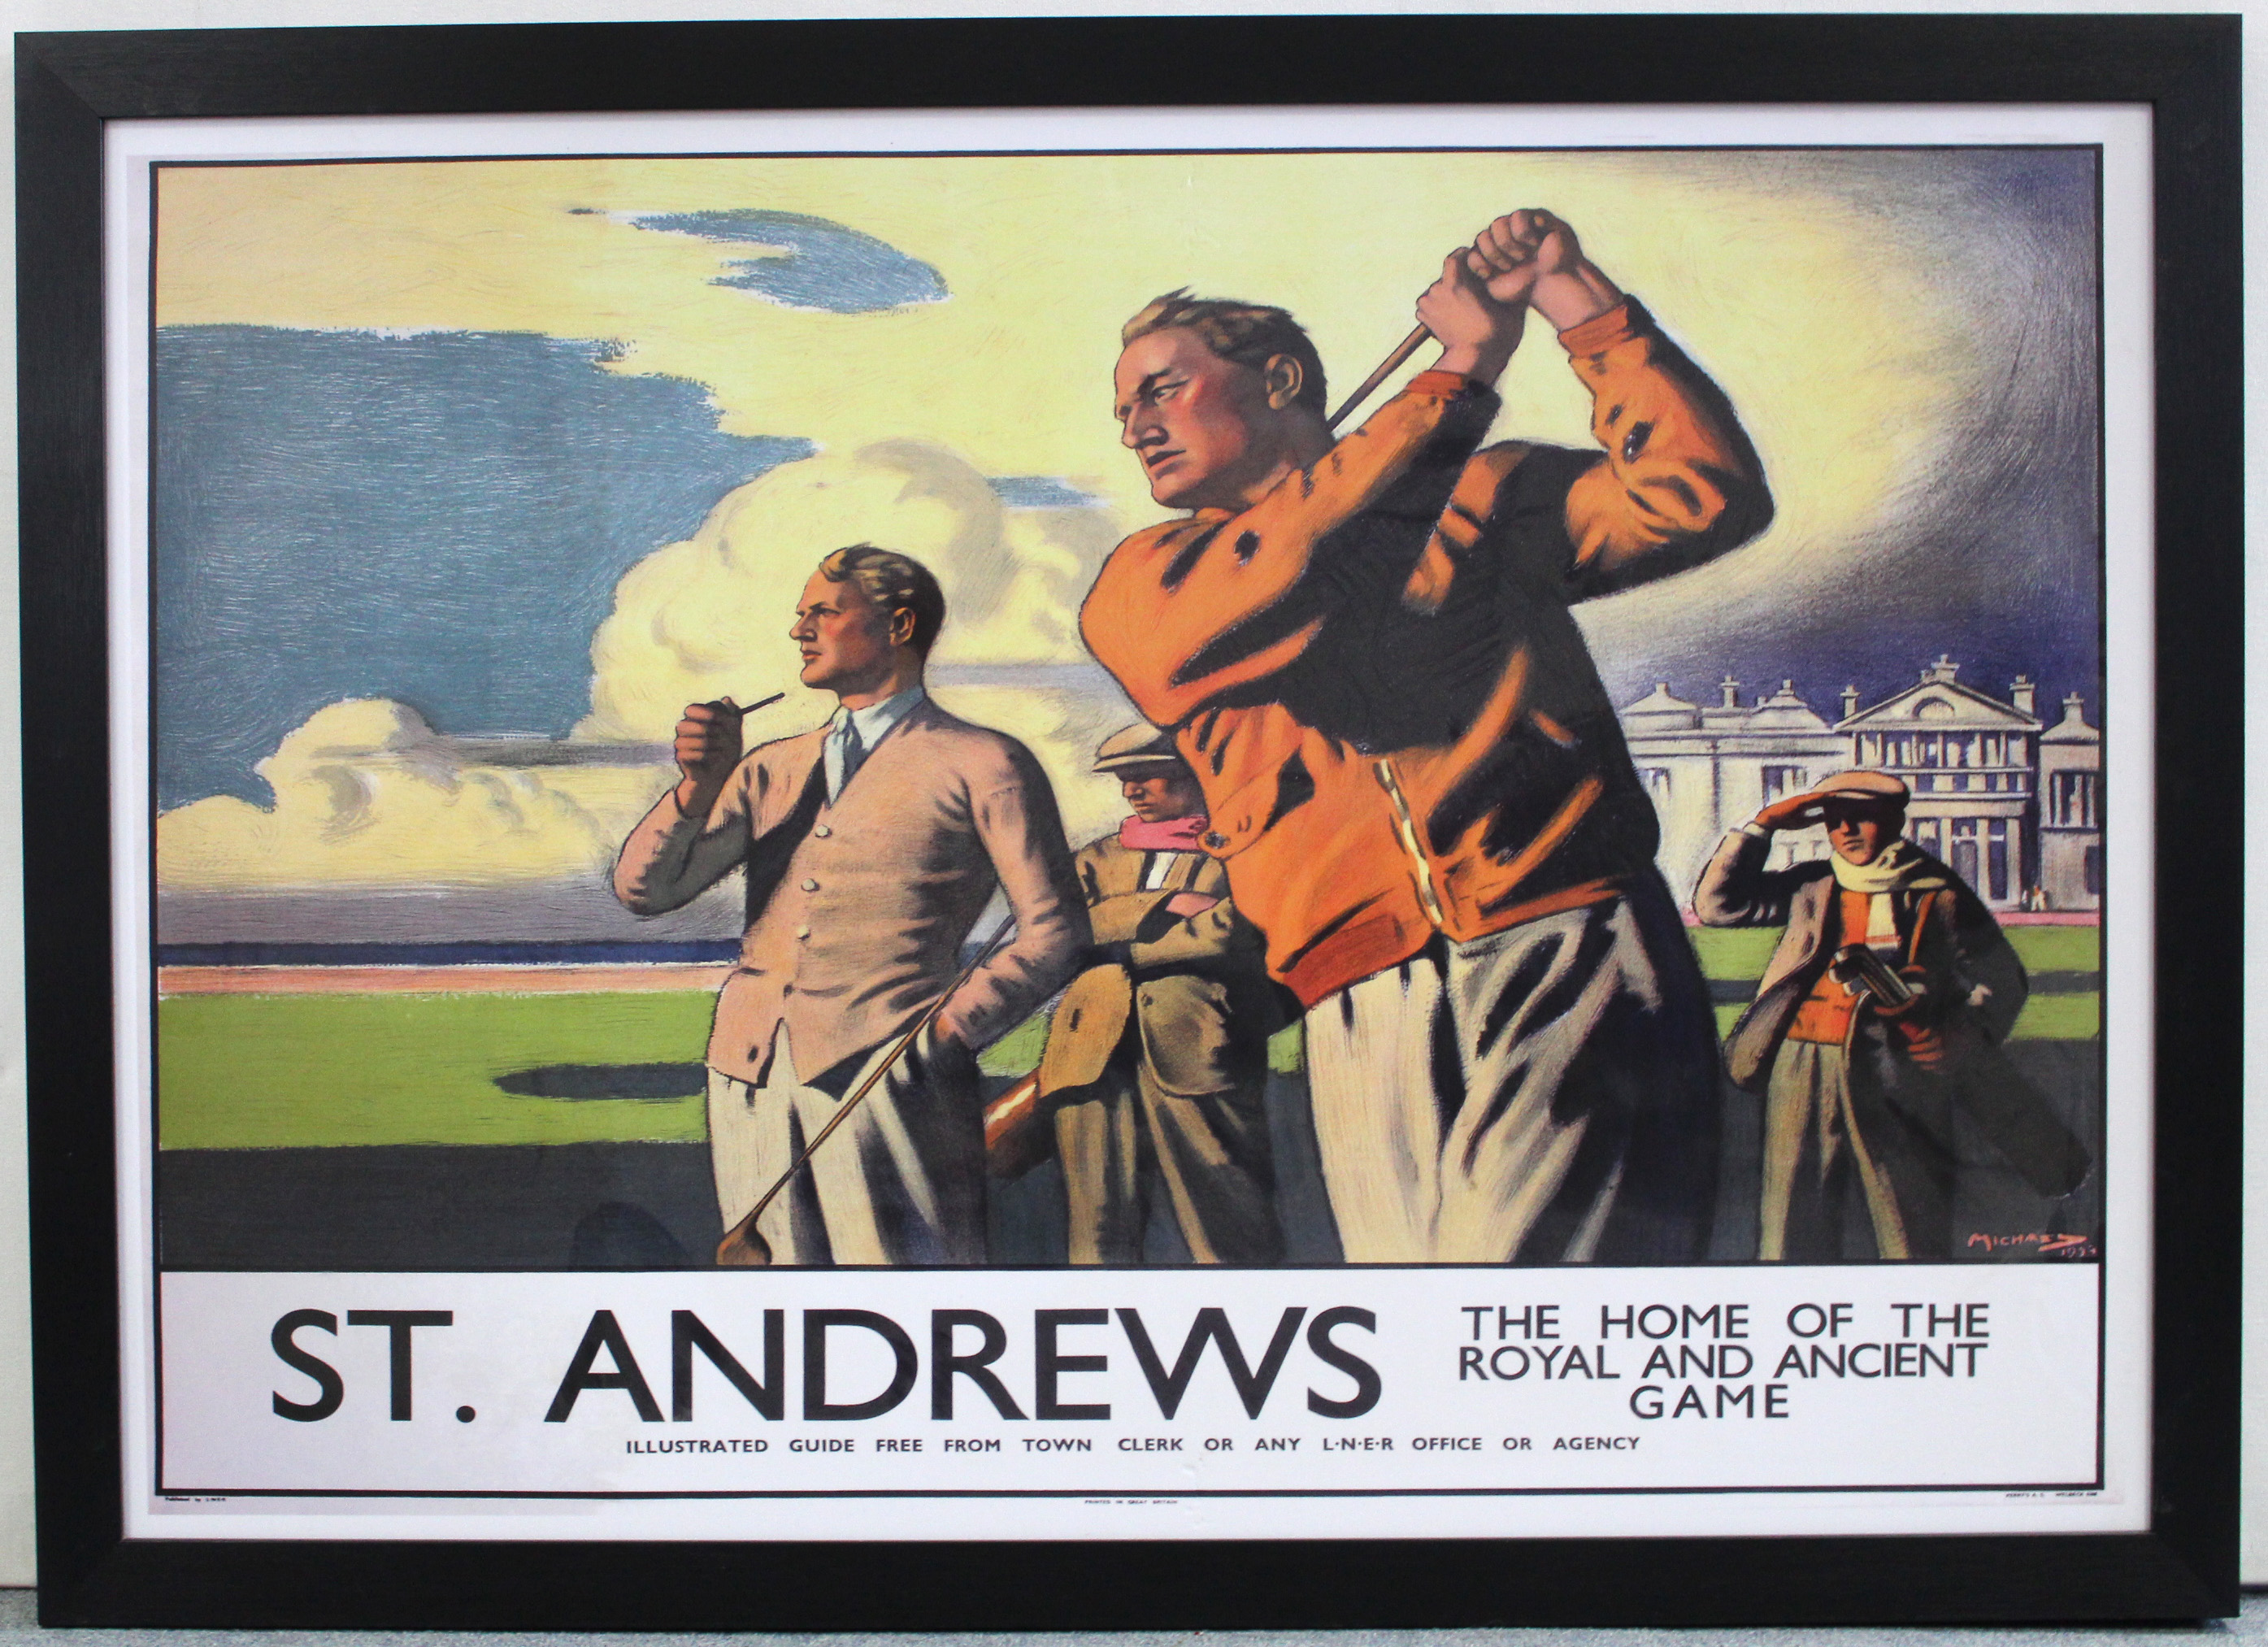 A large reproduction coloured golf print titled “ST. ANDREWS, THE HOME OF THE ROYAL AND ANCIENT